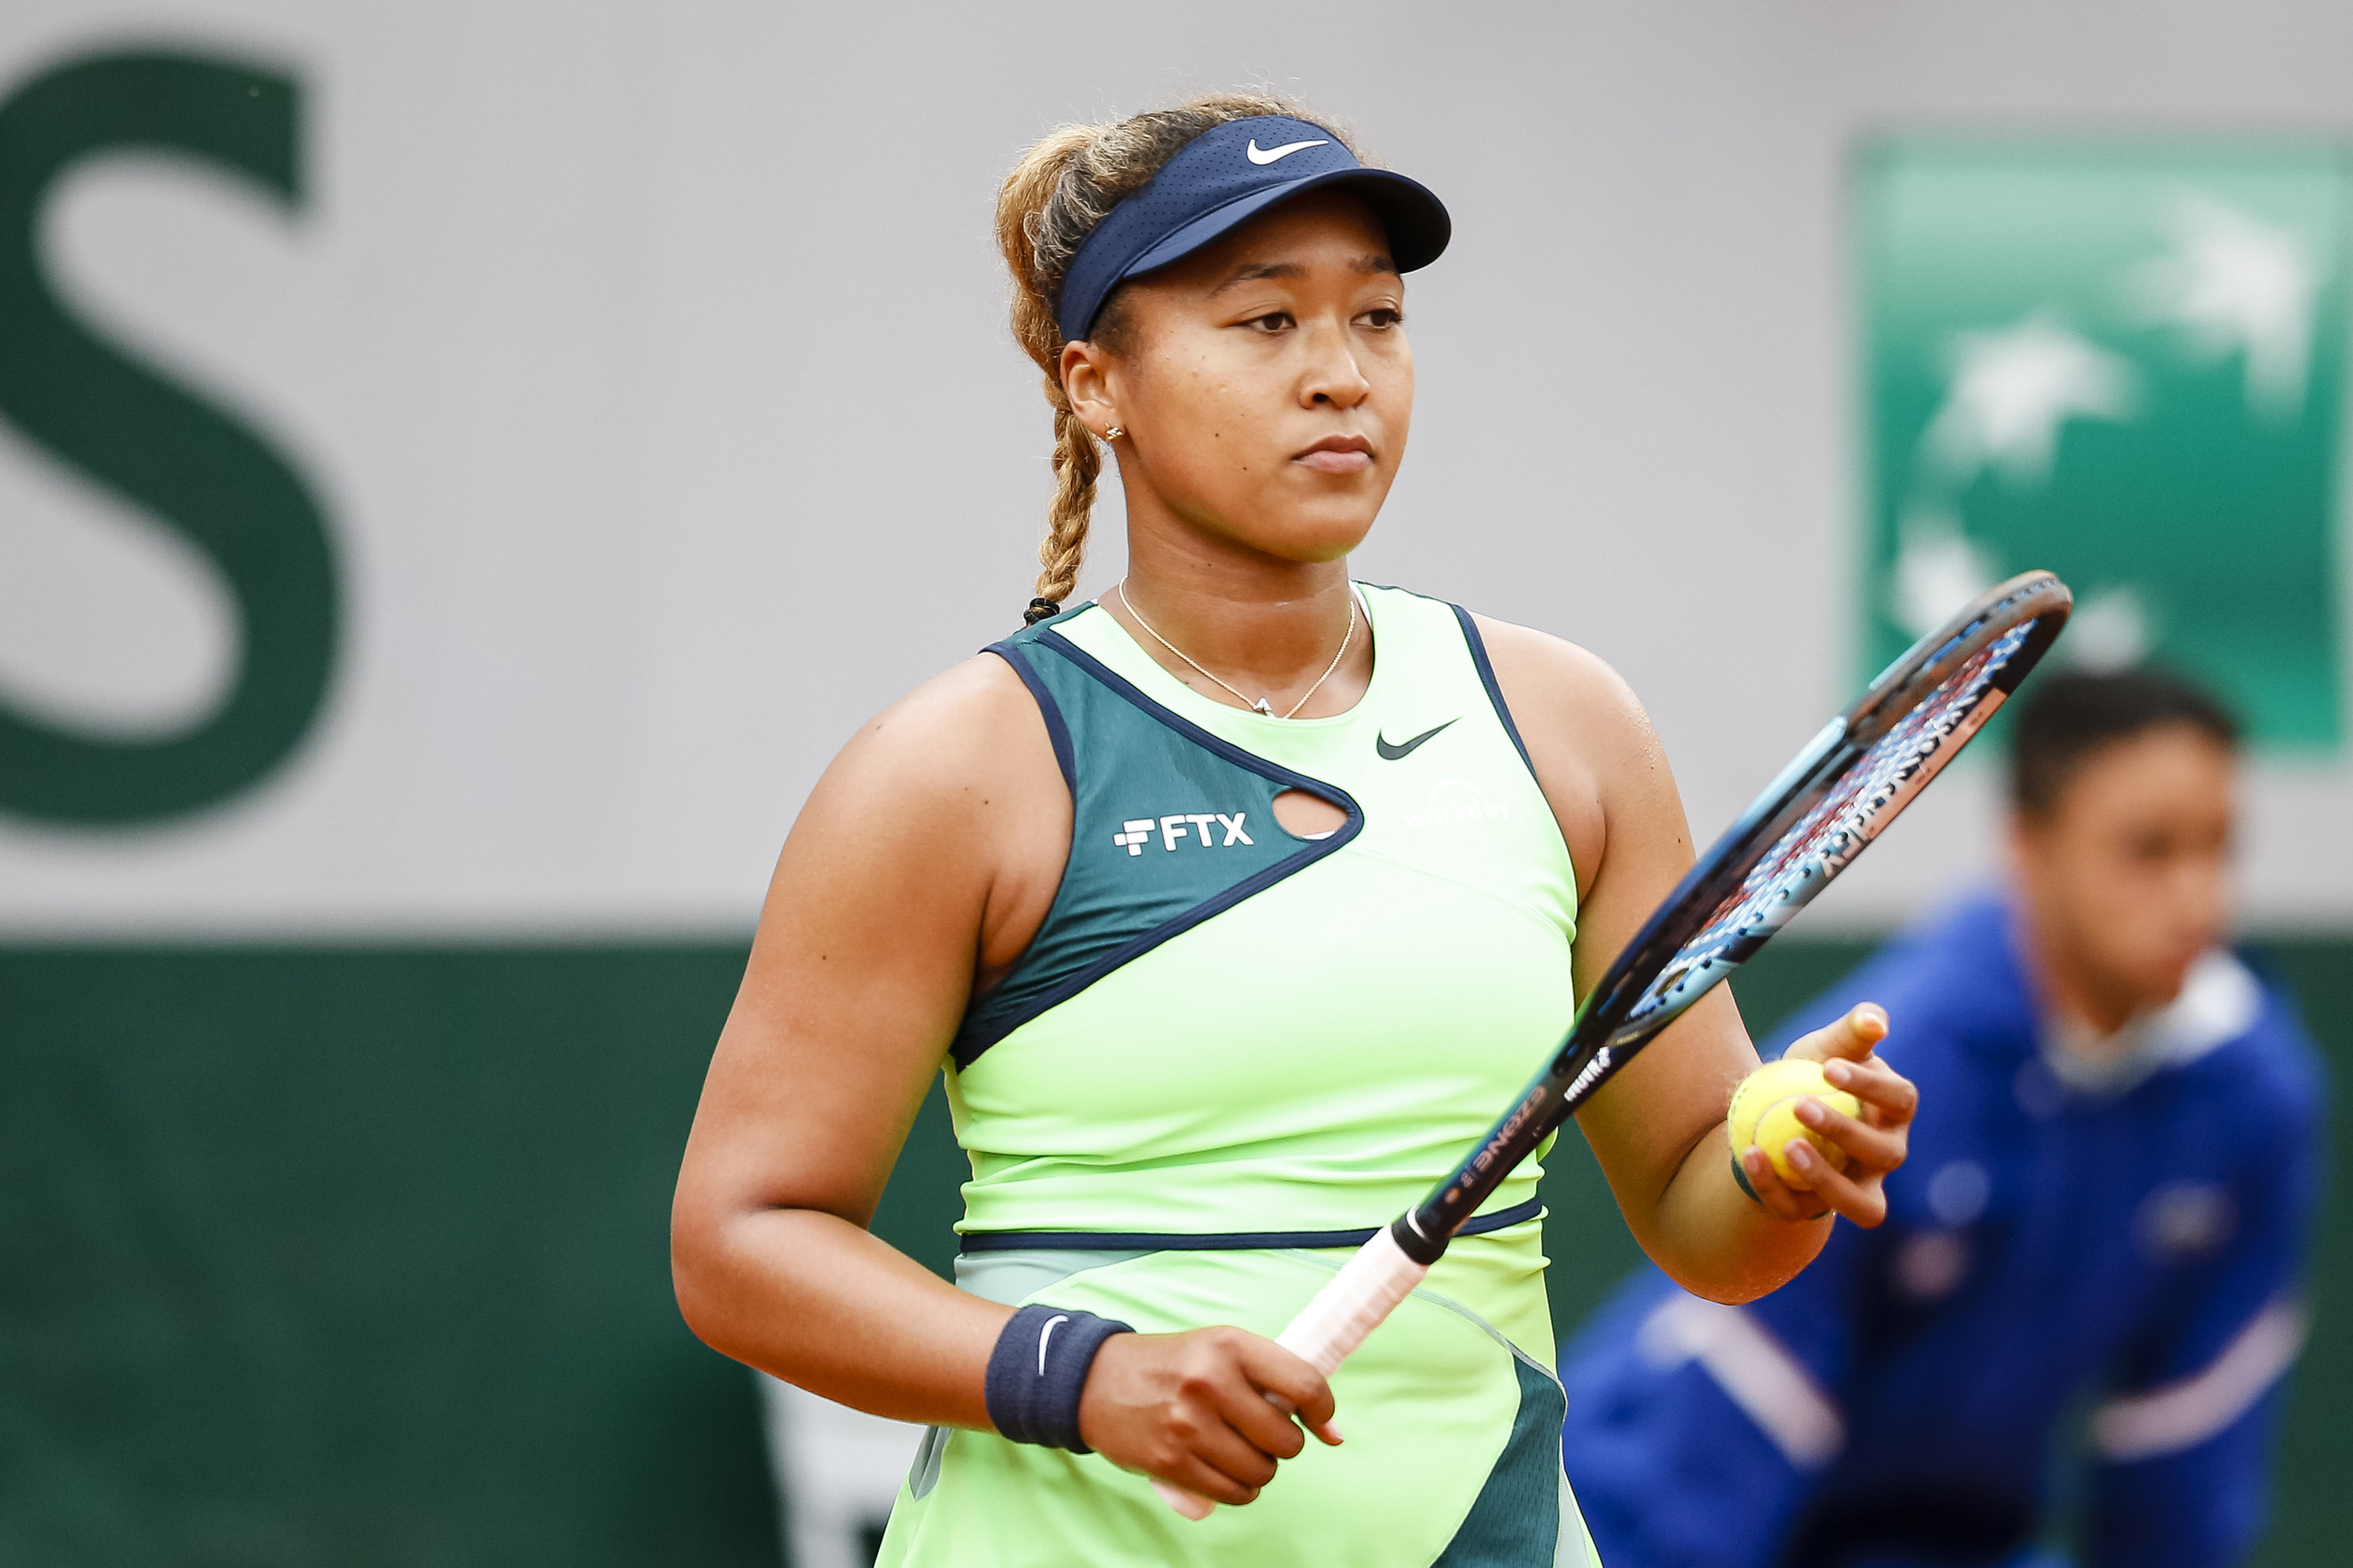 Naomi Osaka with a tennis racquet in hand.